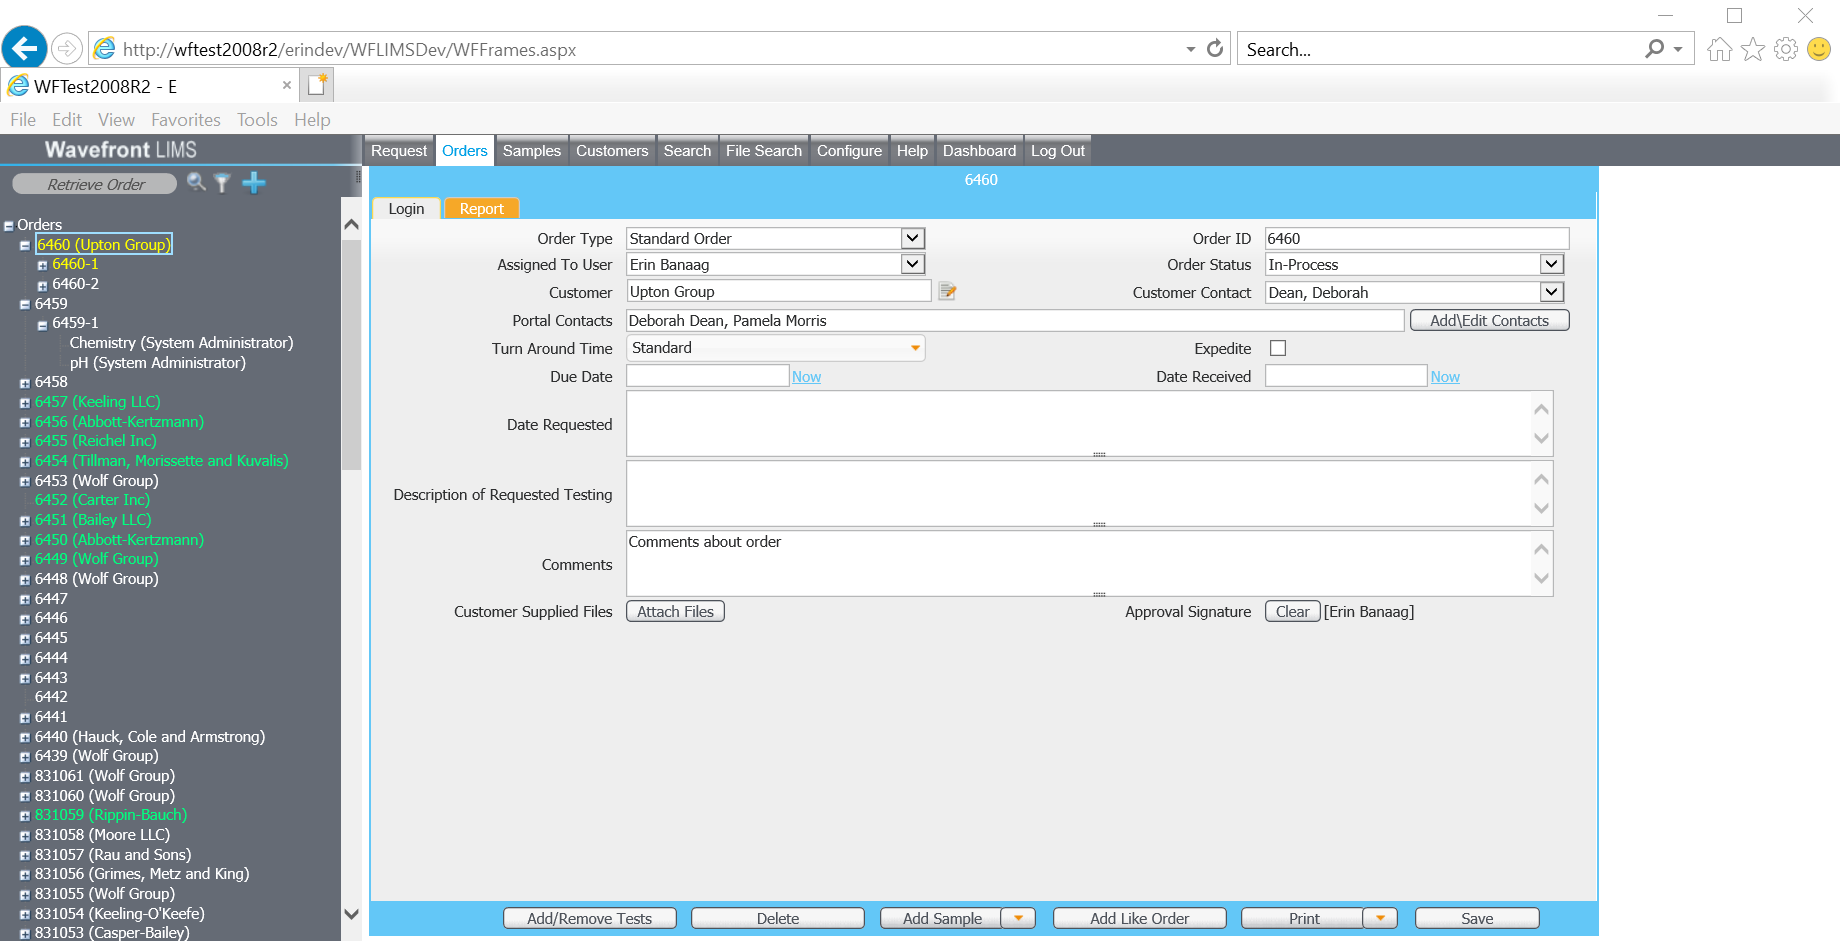 Wavefront LIMS User Interface: Displays order, sample, and test hierarchy and data collection form.